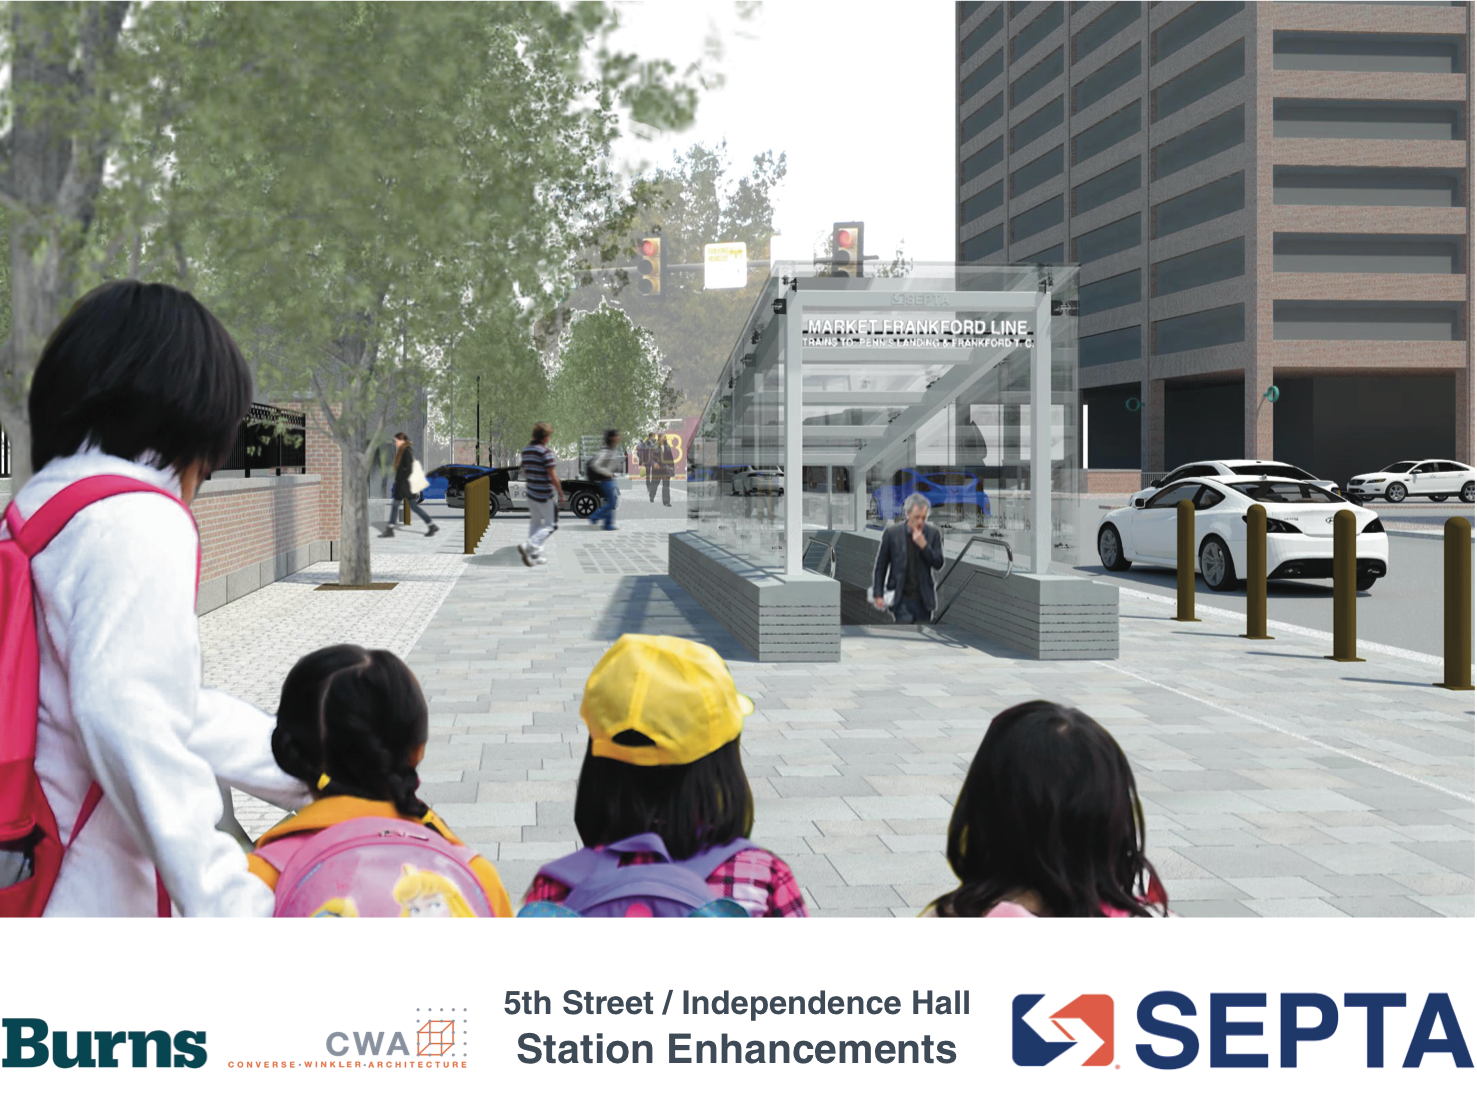 5th Street / Independence Hall: Rendering of new SW entrance | courtesy of SEPTA